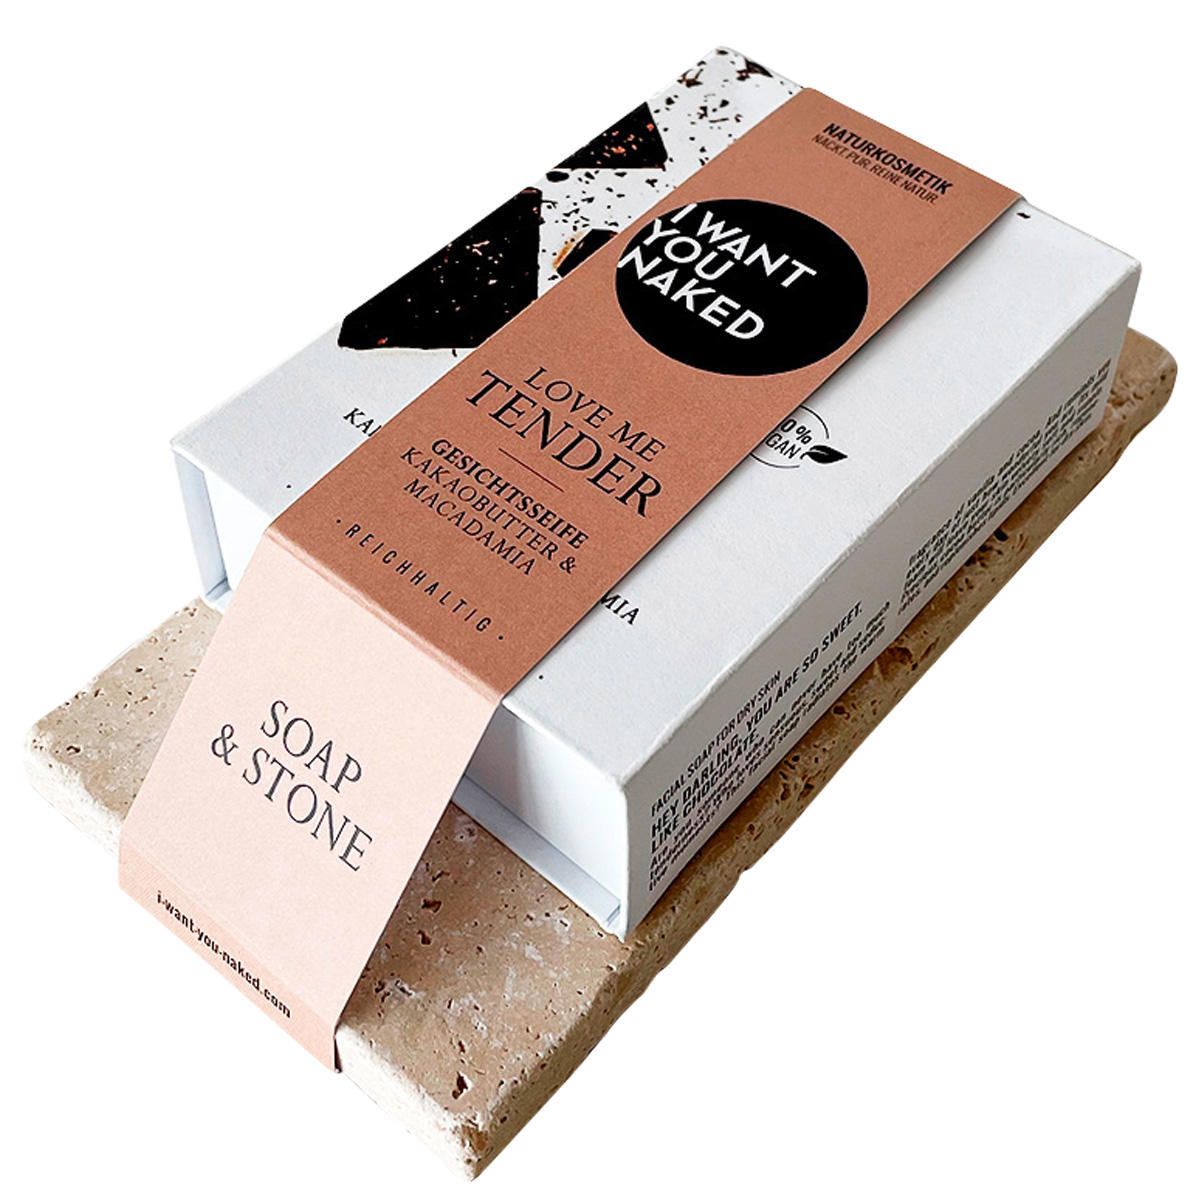 I WANT YOU NAKED LOVE ME TENDER SOAP & STONE  - 2